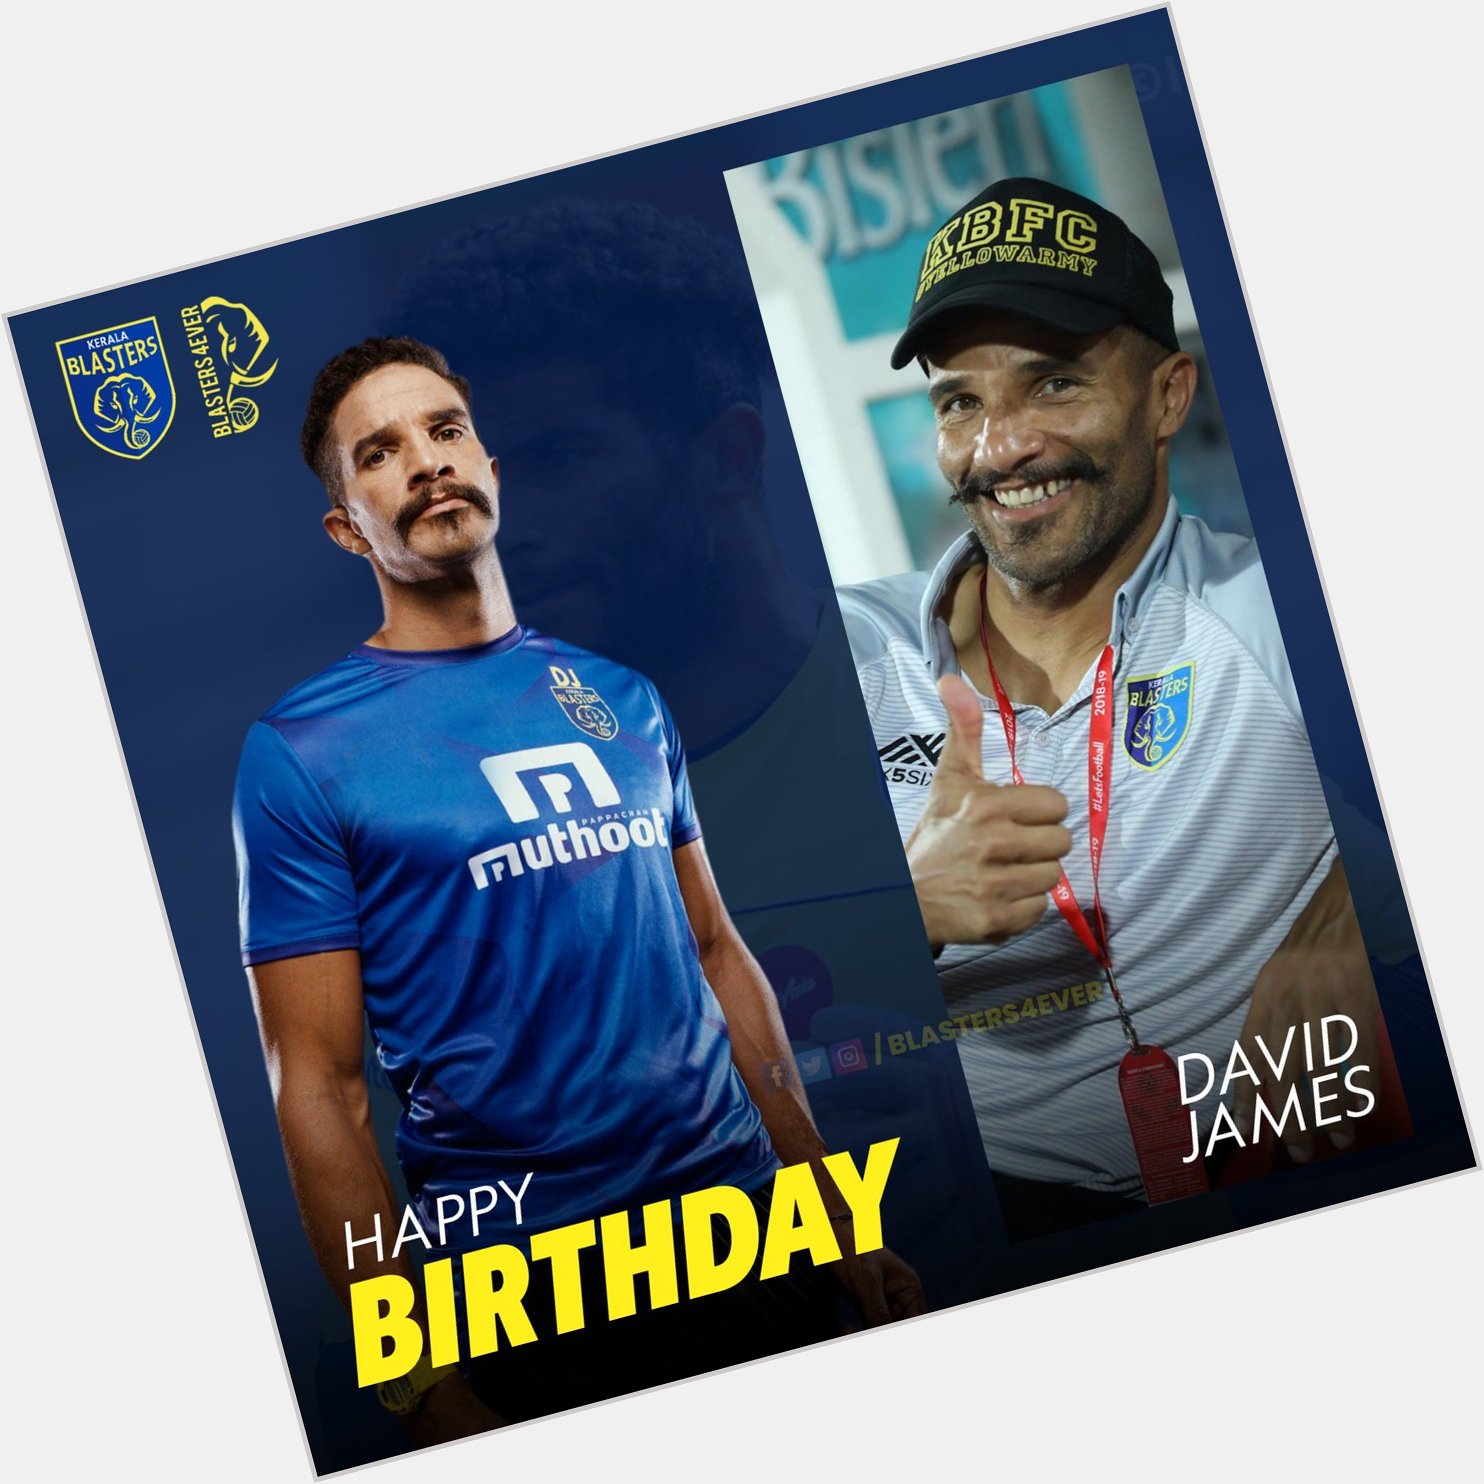 Here is wishing a happy birthday to David James!      